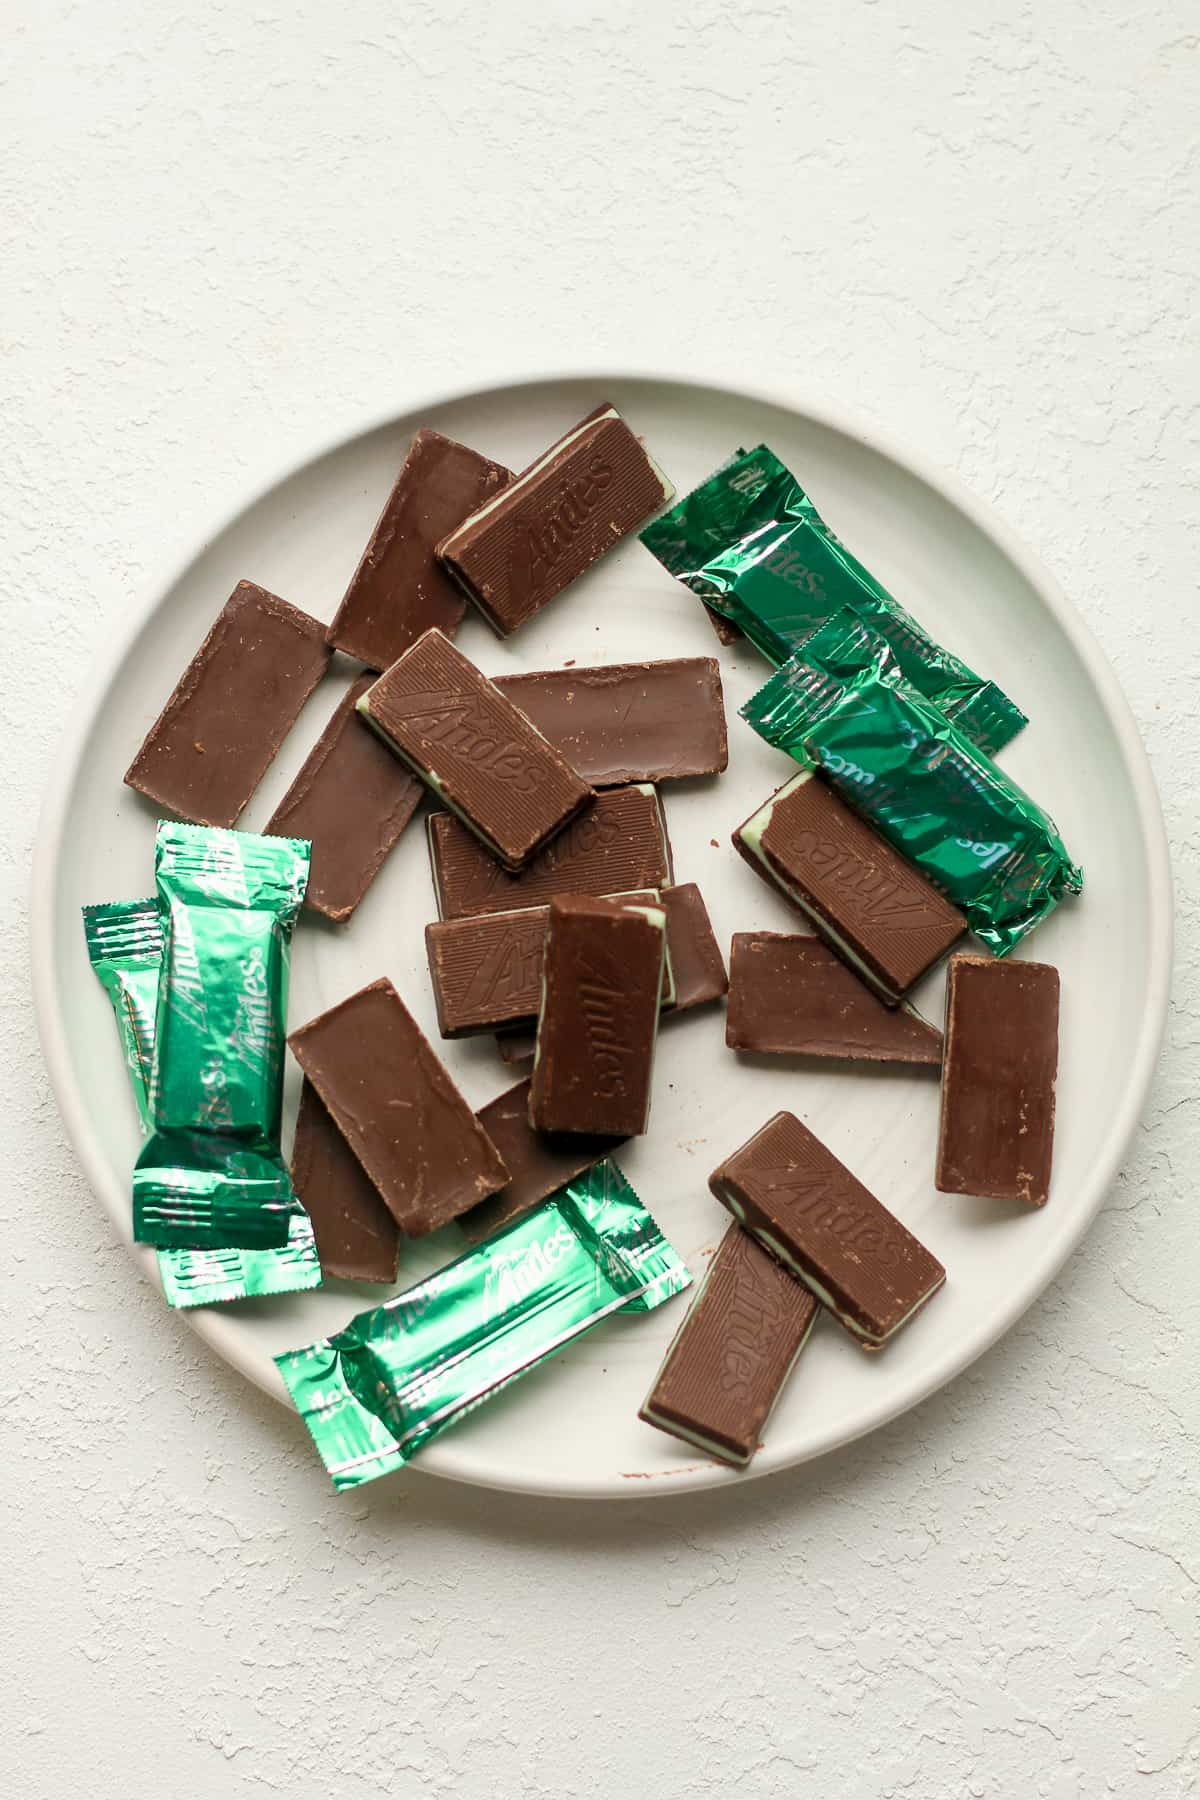 A plate of the Andes mints.